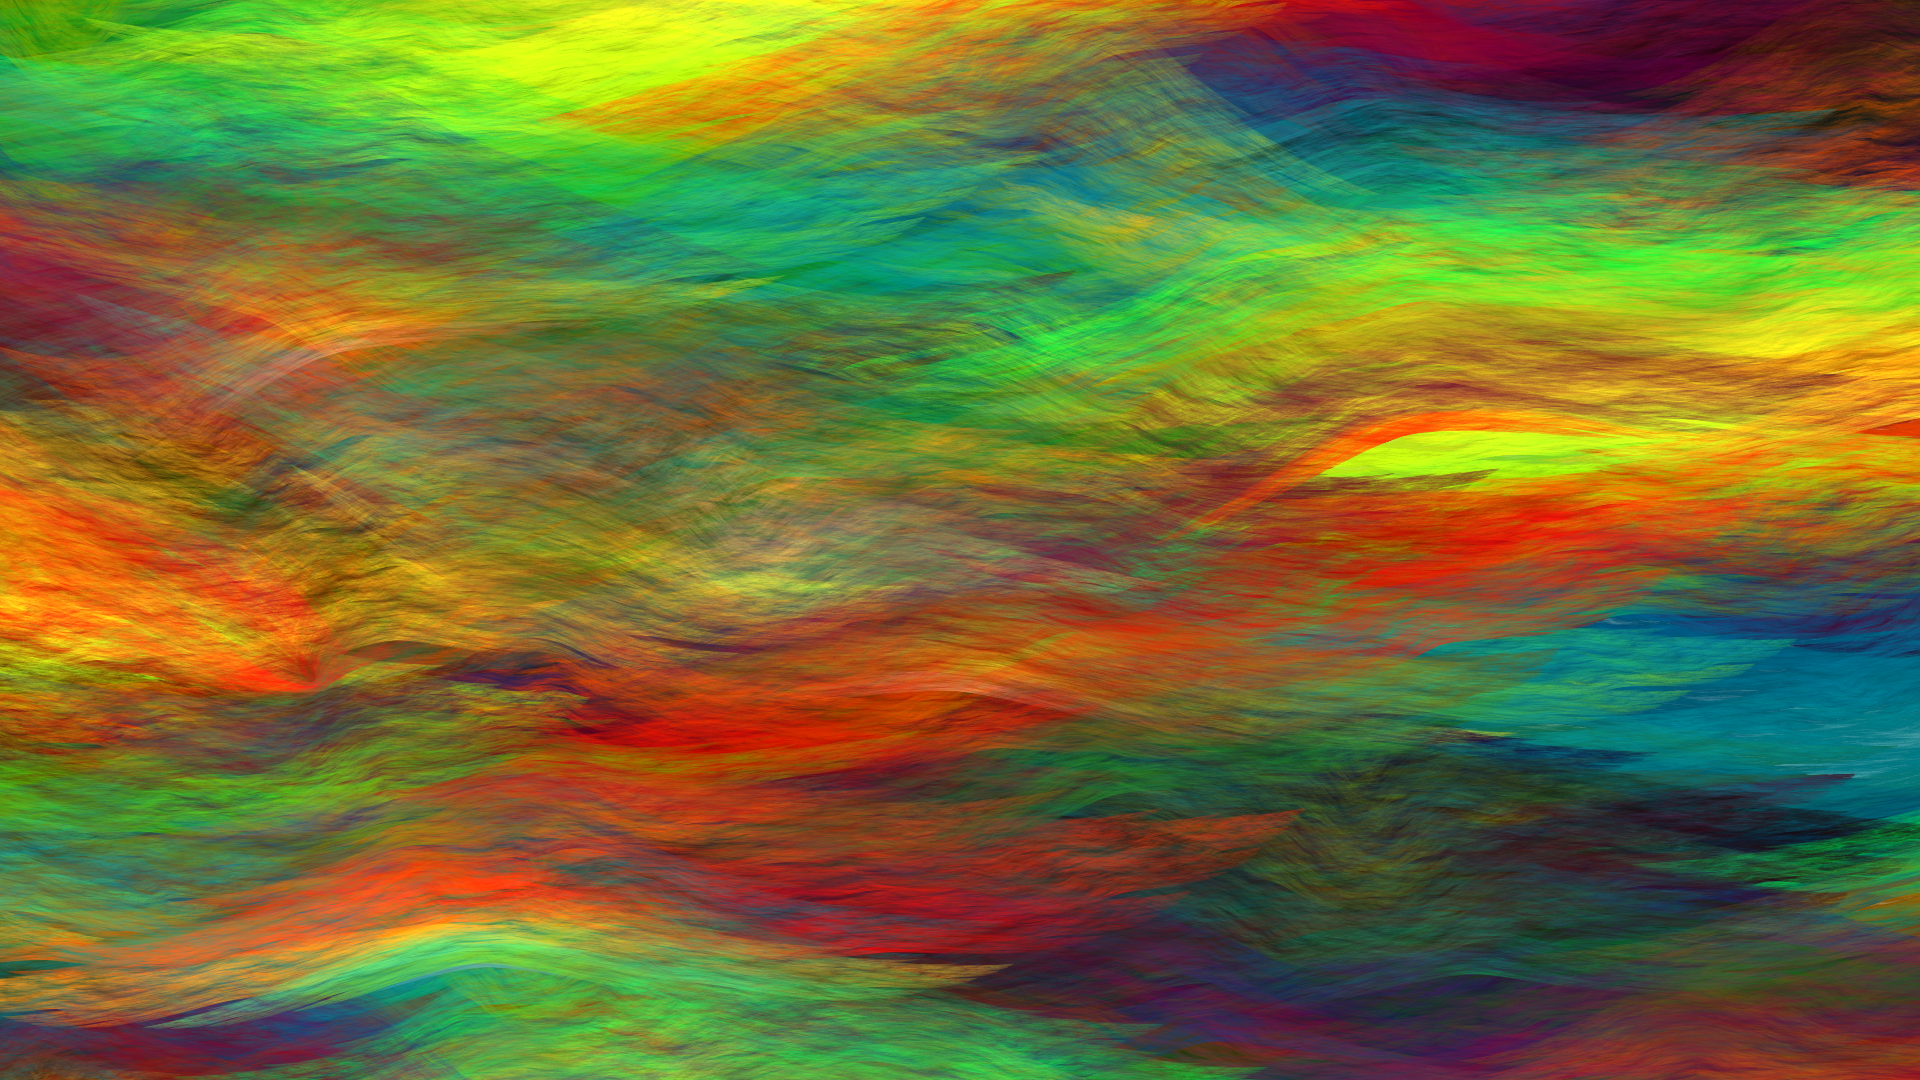 Abstract Apophysis Software Artistic Colorful Colors Digital Art Fractal Wave 1920x1080